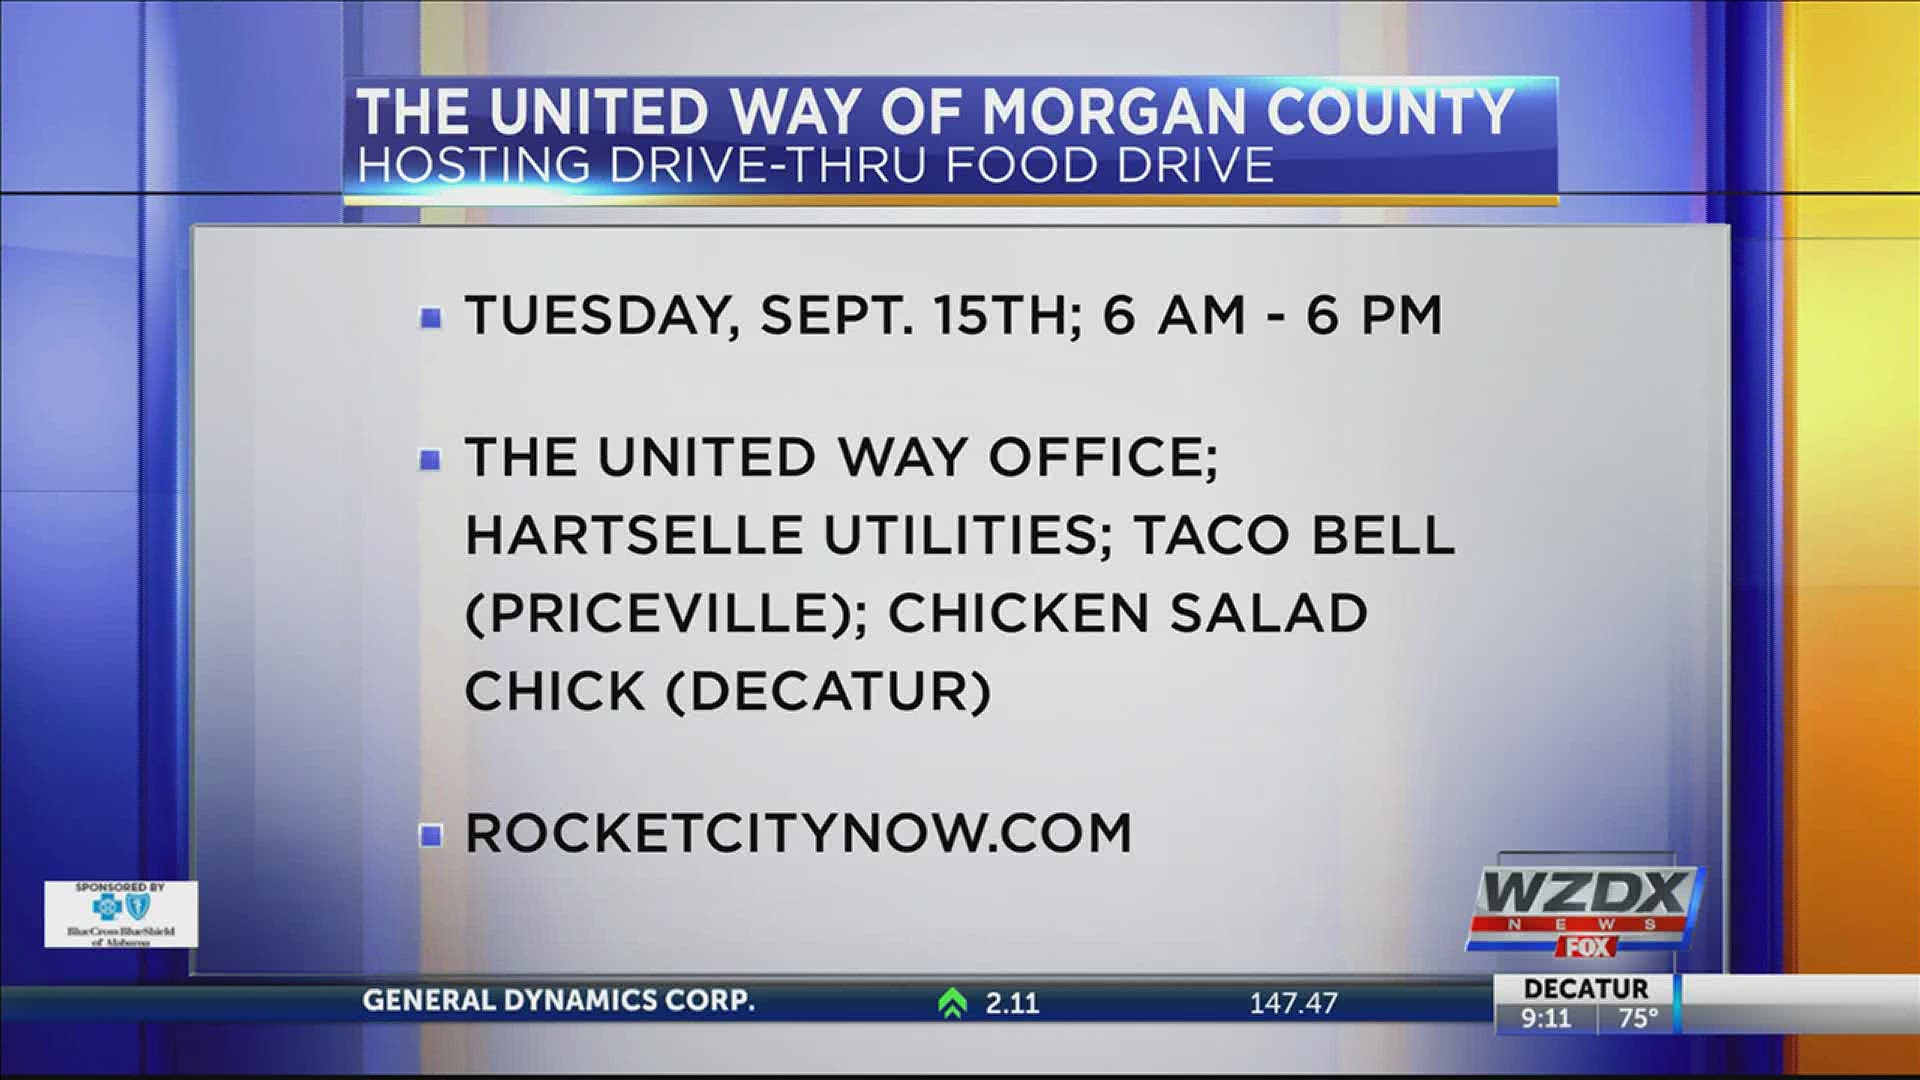 The United Way of Morgan County's Food Drive will help provide meals for those in need.